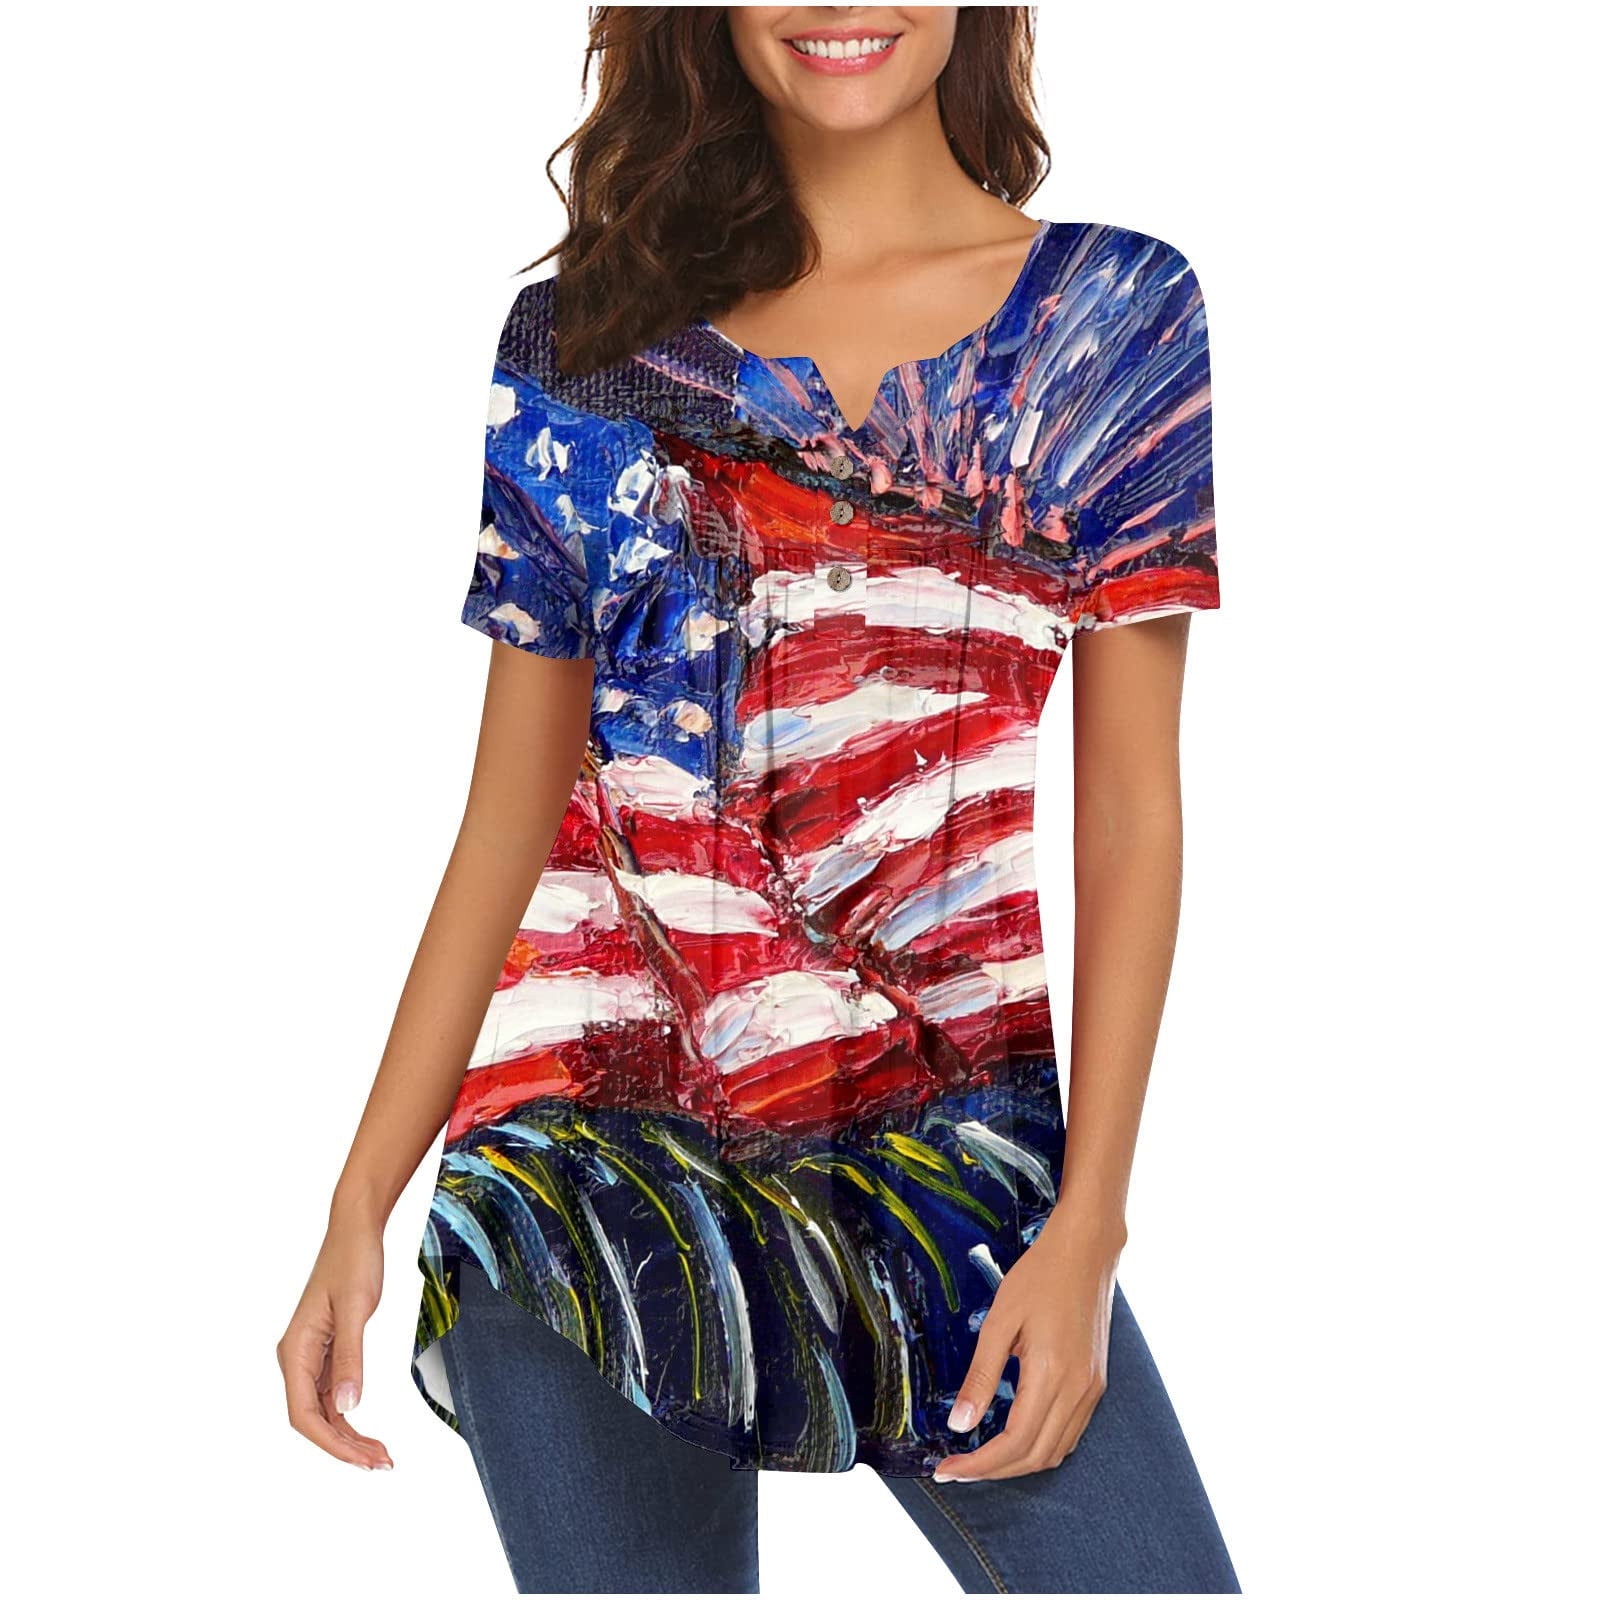 IROINNID 4th of July Tunic For Women Fashion Casual Loose Tops V-Neck ...